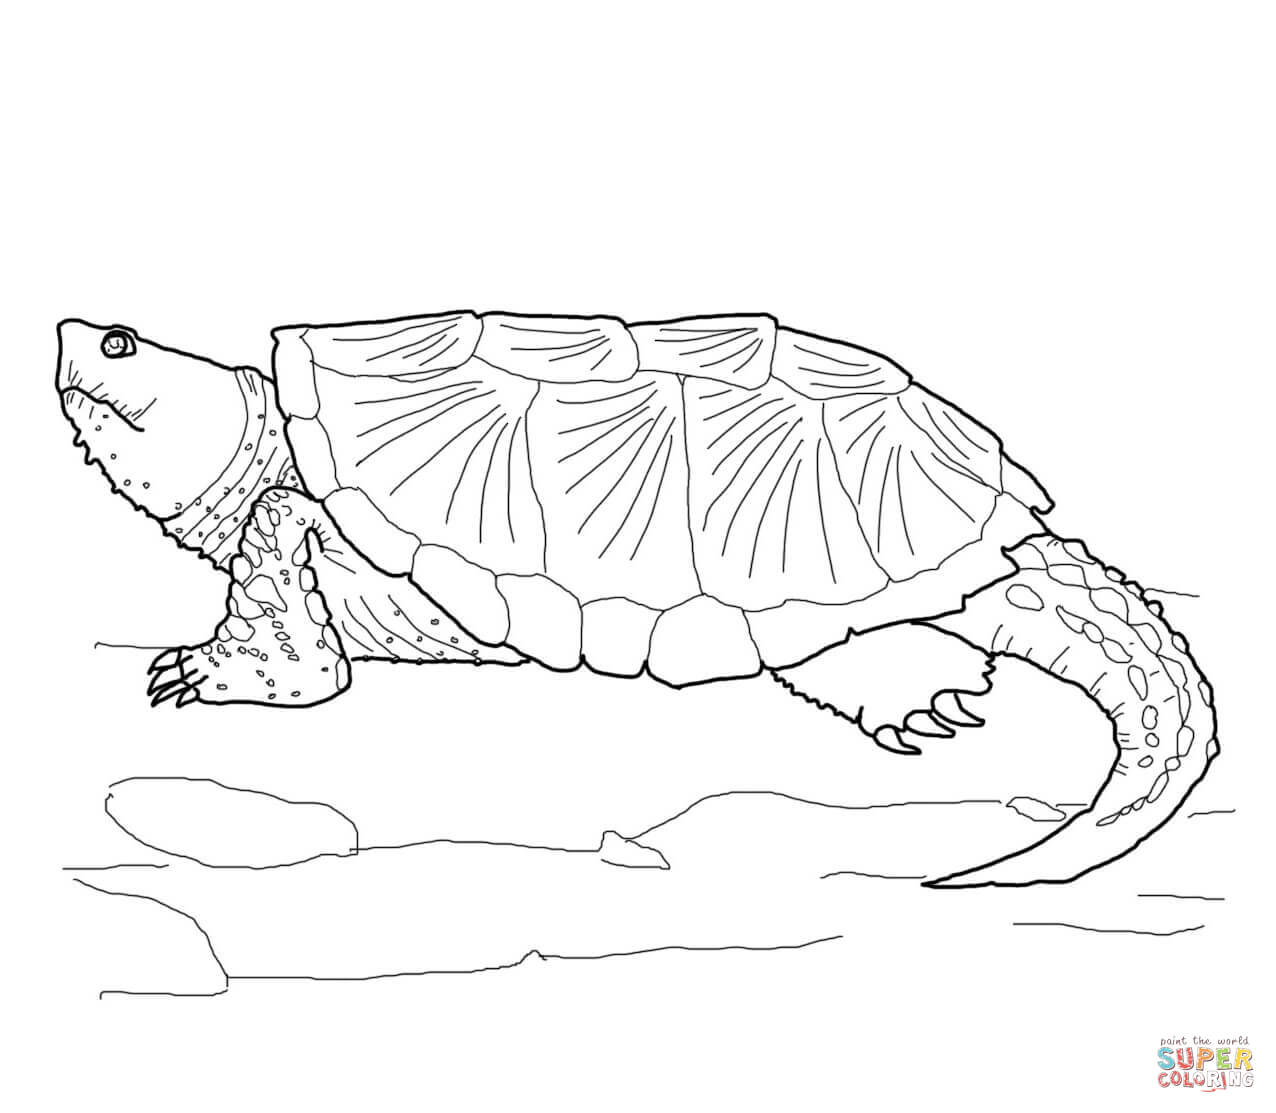 Alligator Snapping Turtle coloring #12, Download drawings